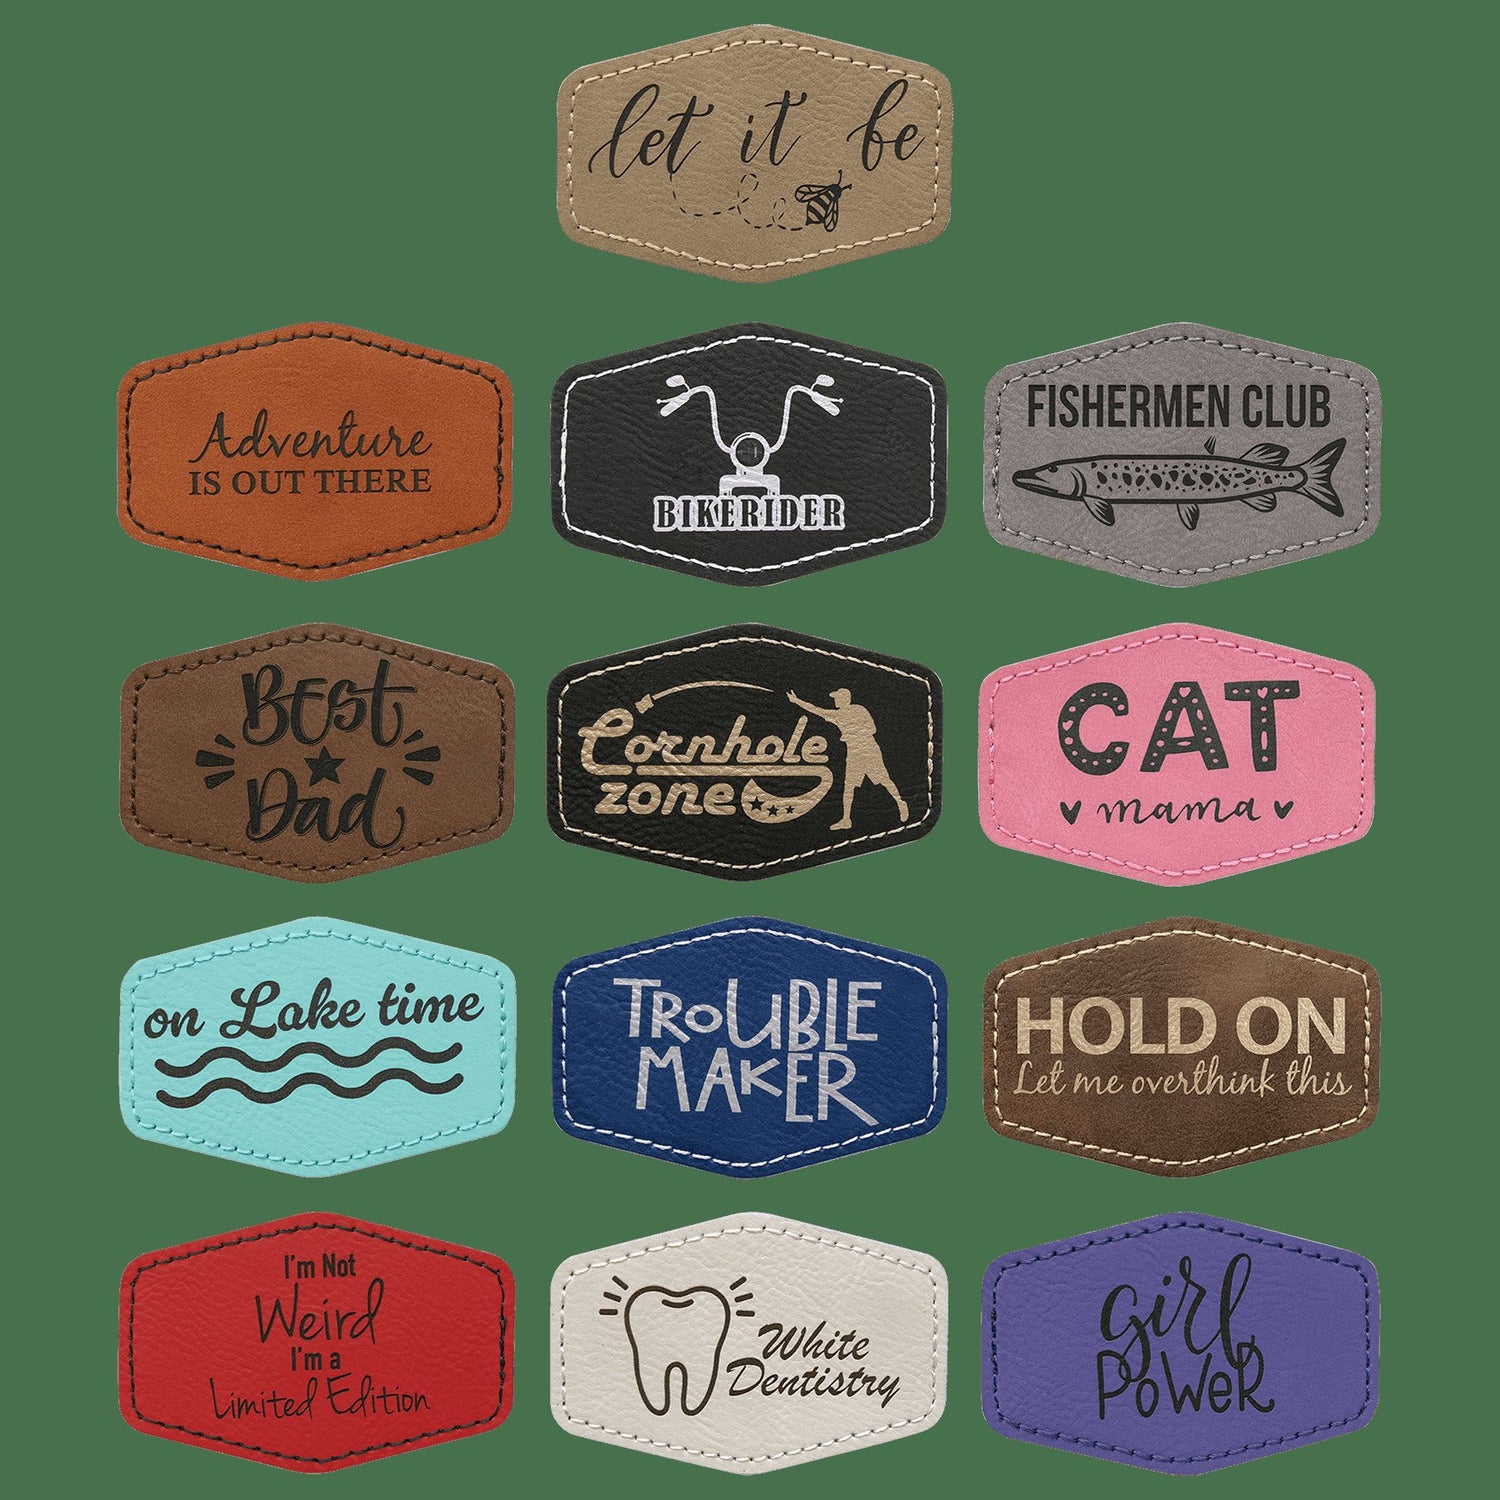 Leatherette Patches